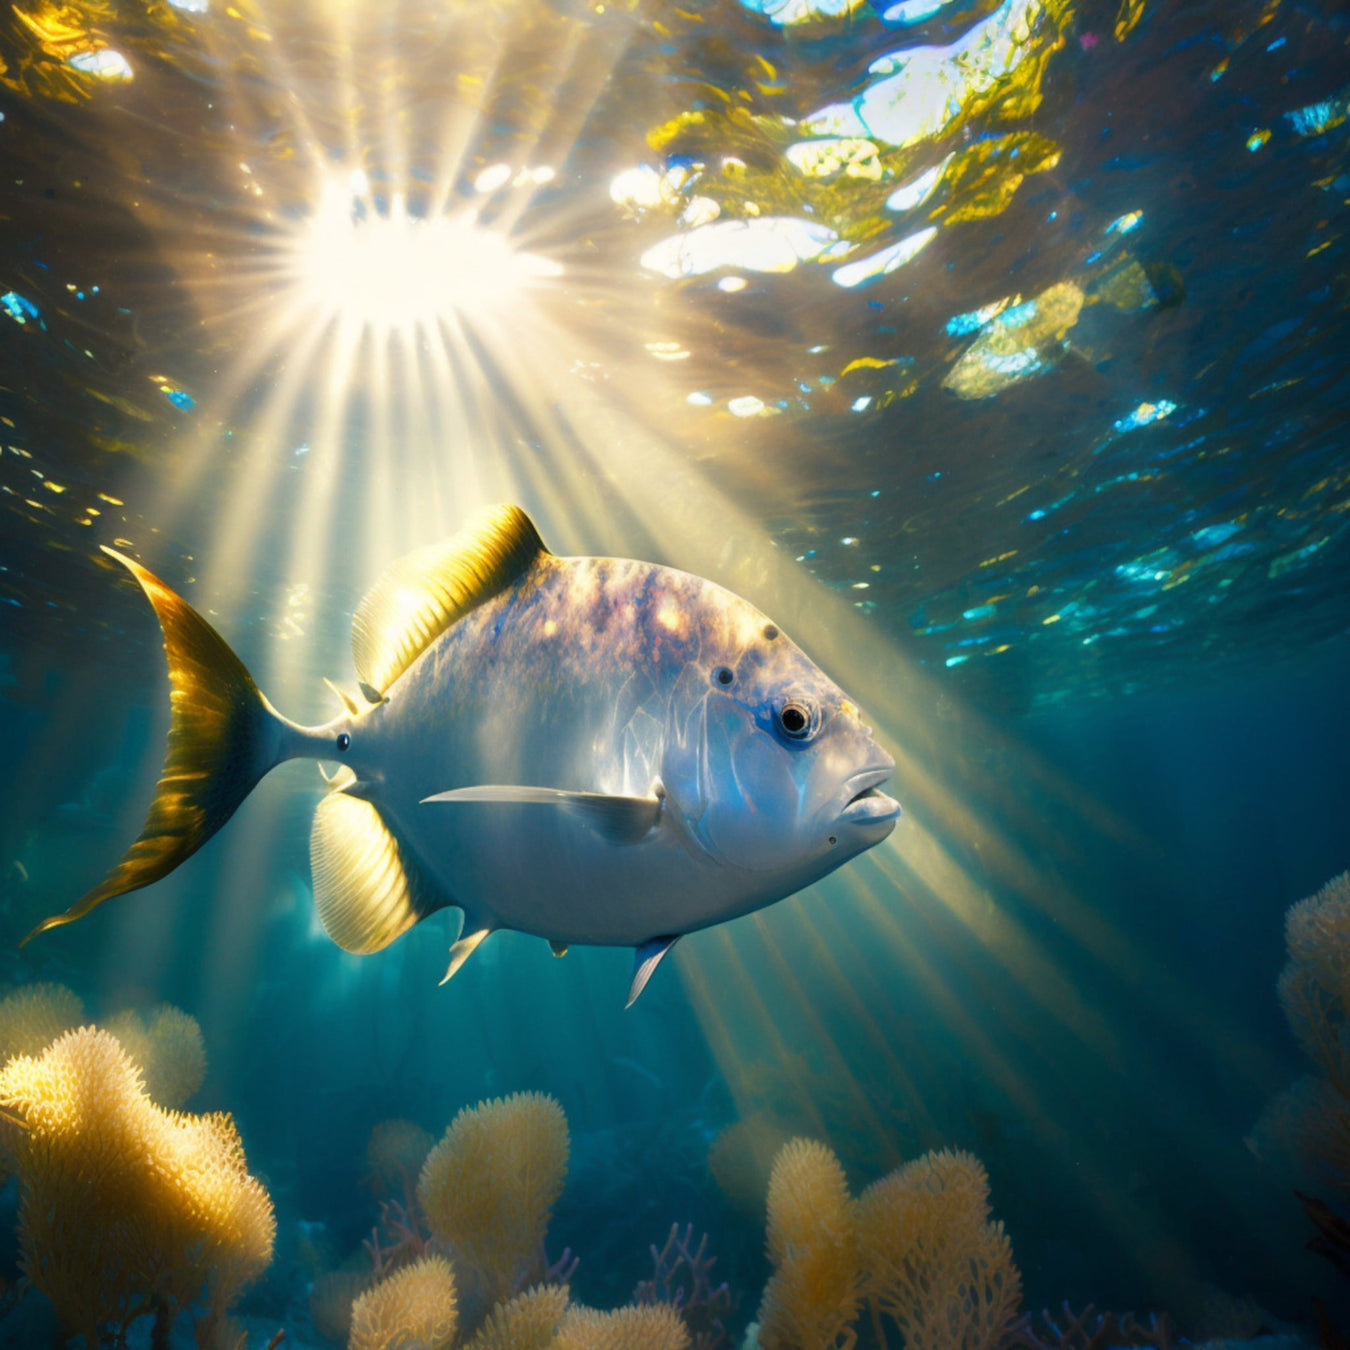 AQUATIC WORLD OF FISH IMAGES - Vermont Country Digital